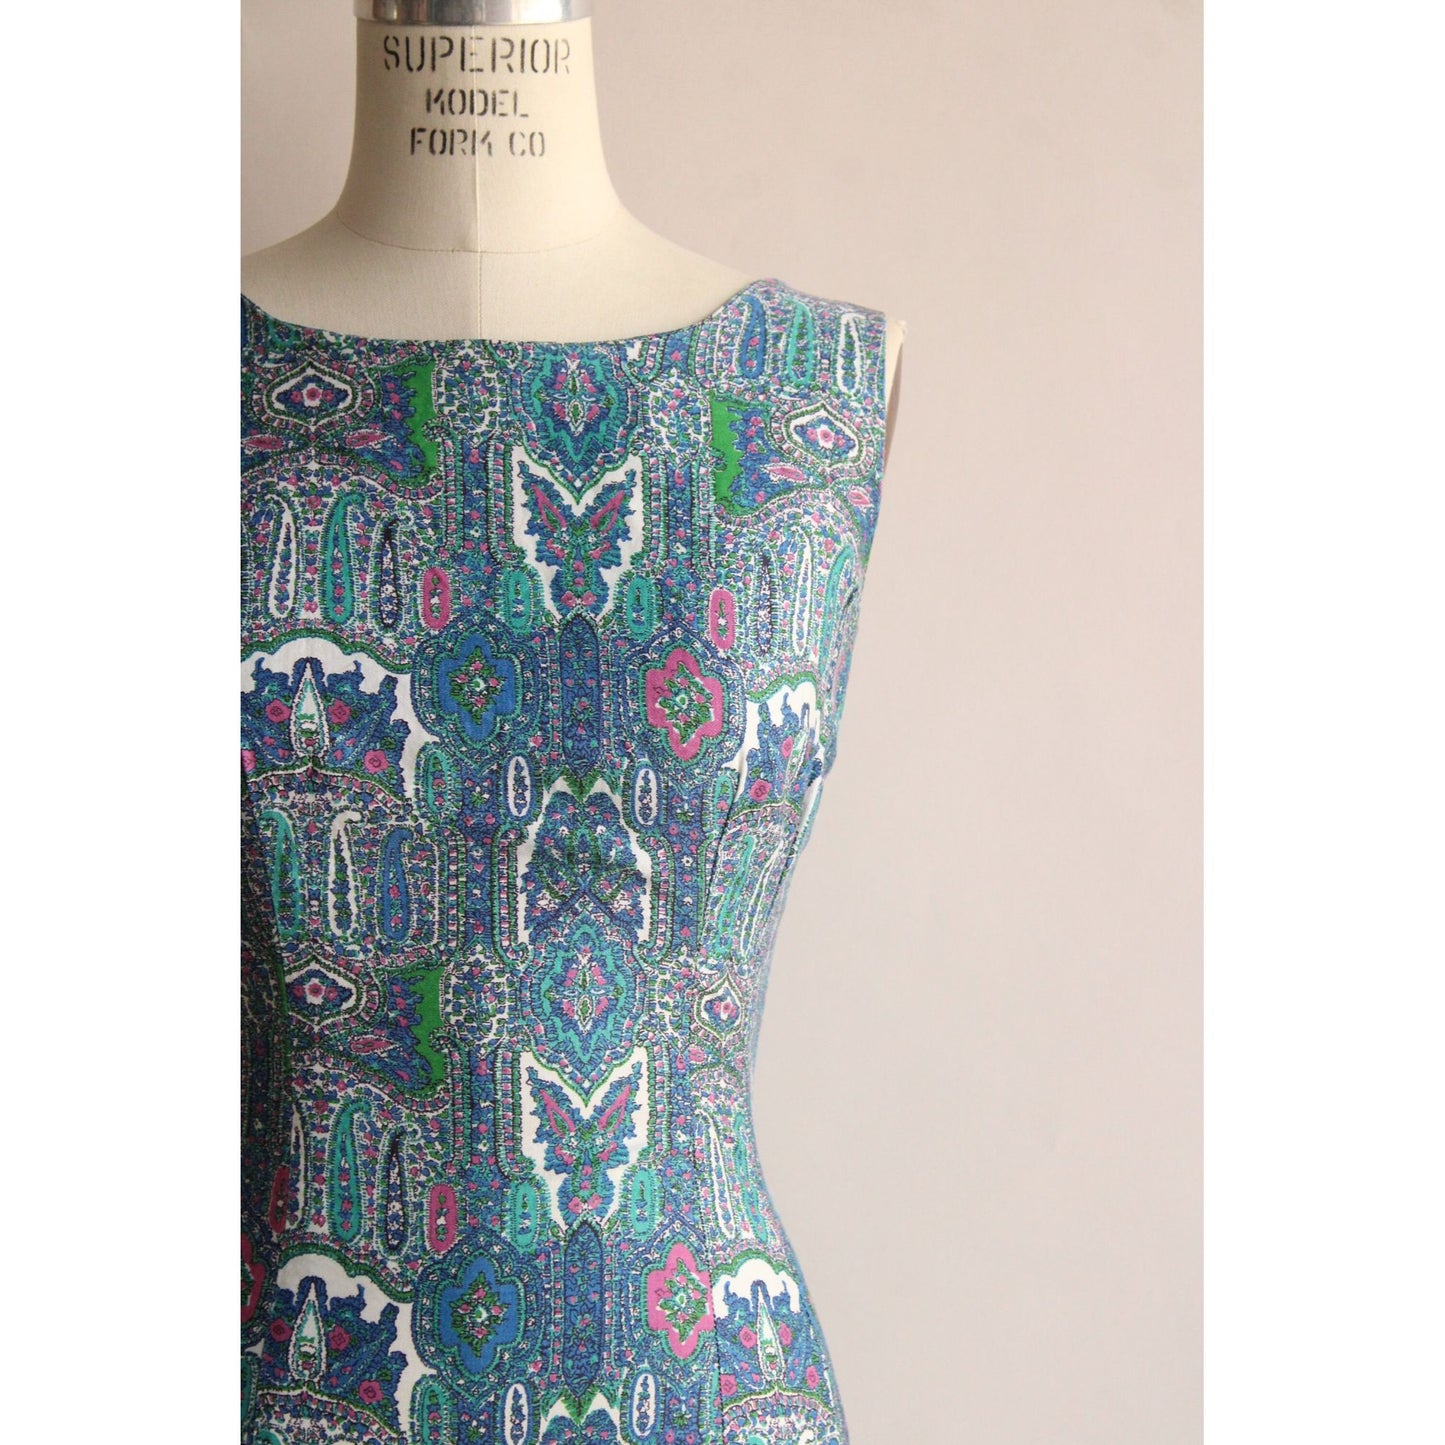 Vintage 1950s Wiggle Dress in a Blue Paisley Print